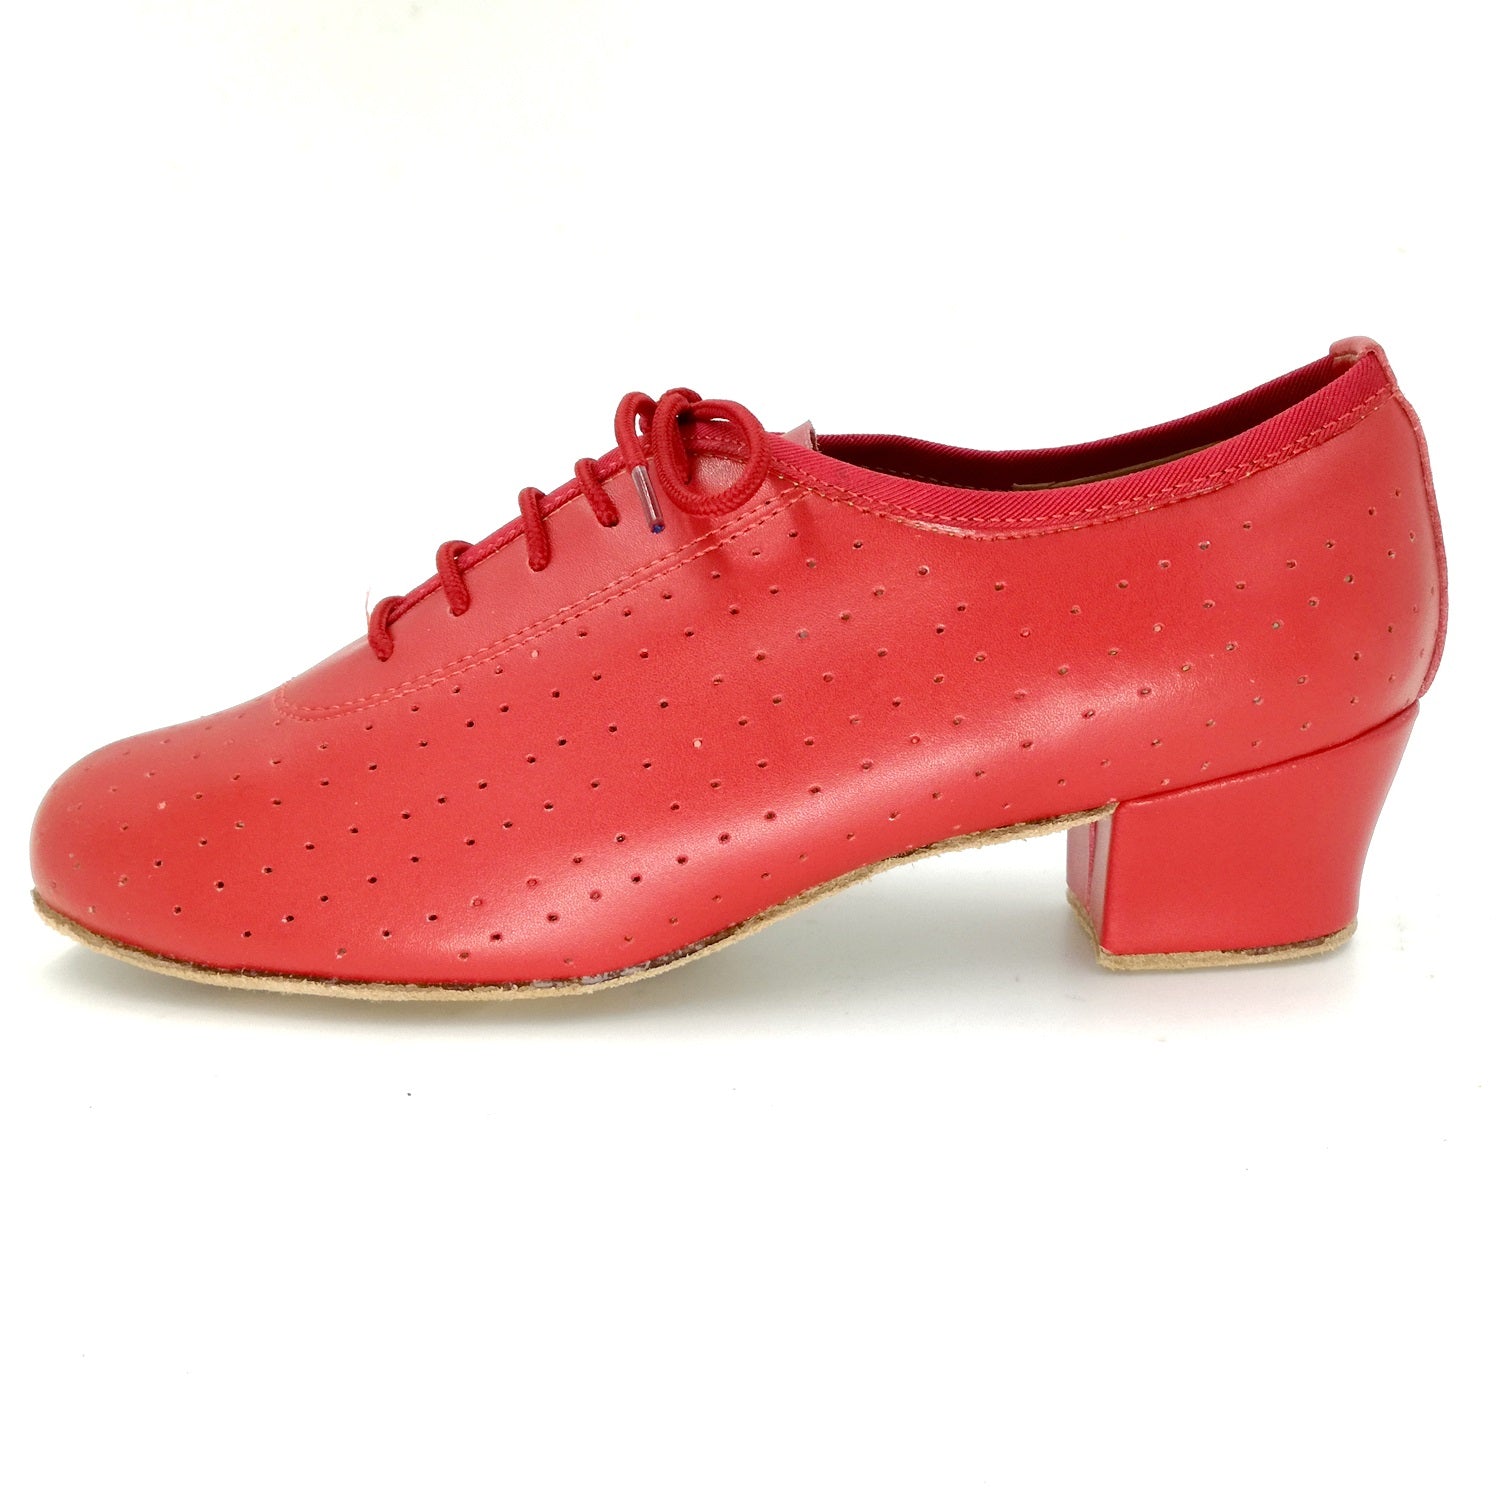 Women red ballroom dancing shoes with suede sole and lace-up closed-toe design for tango and latin practice (PD5002F)1